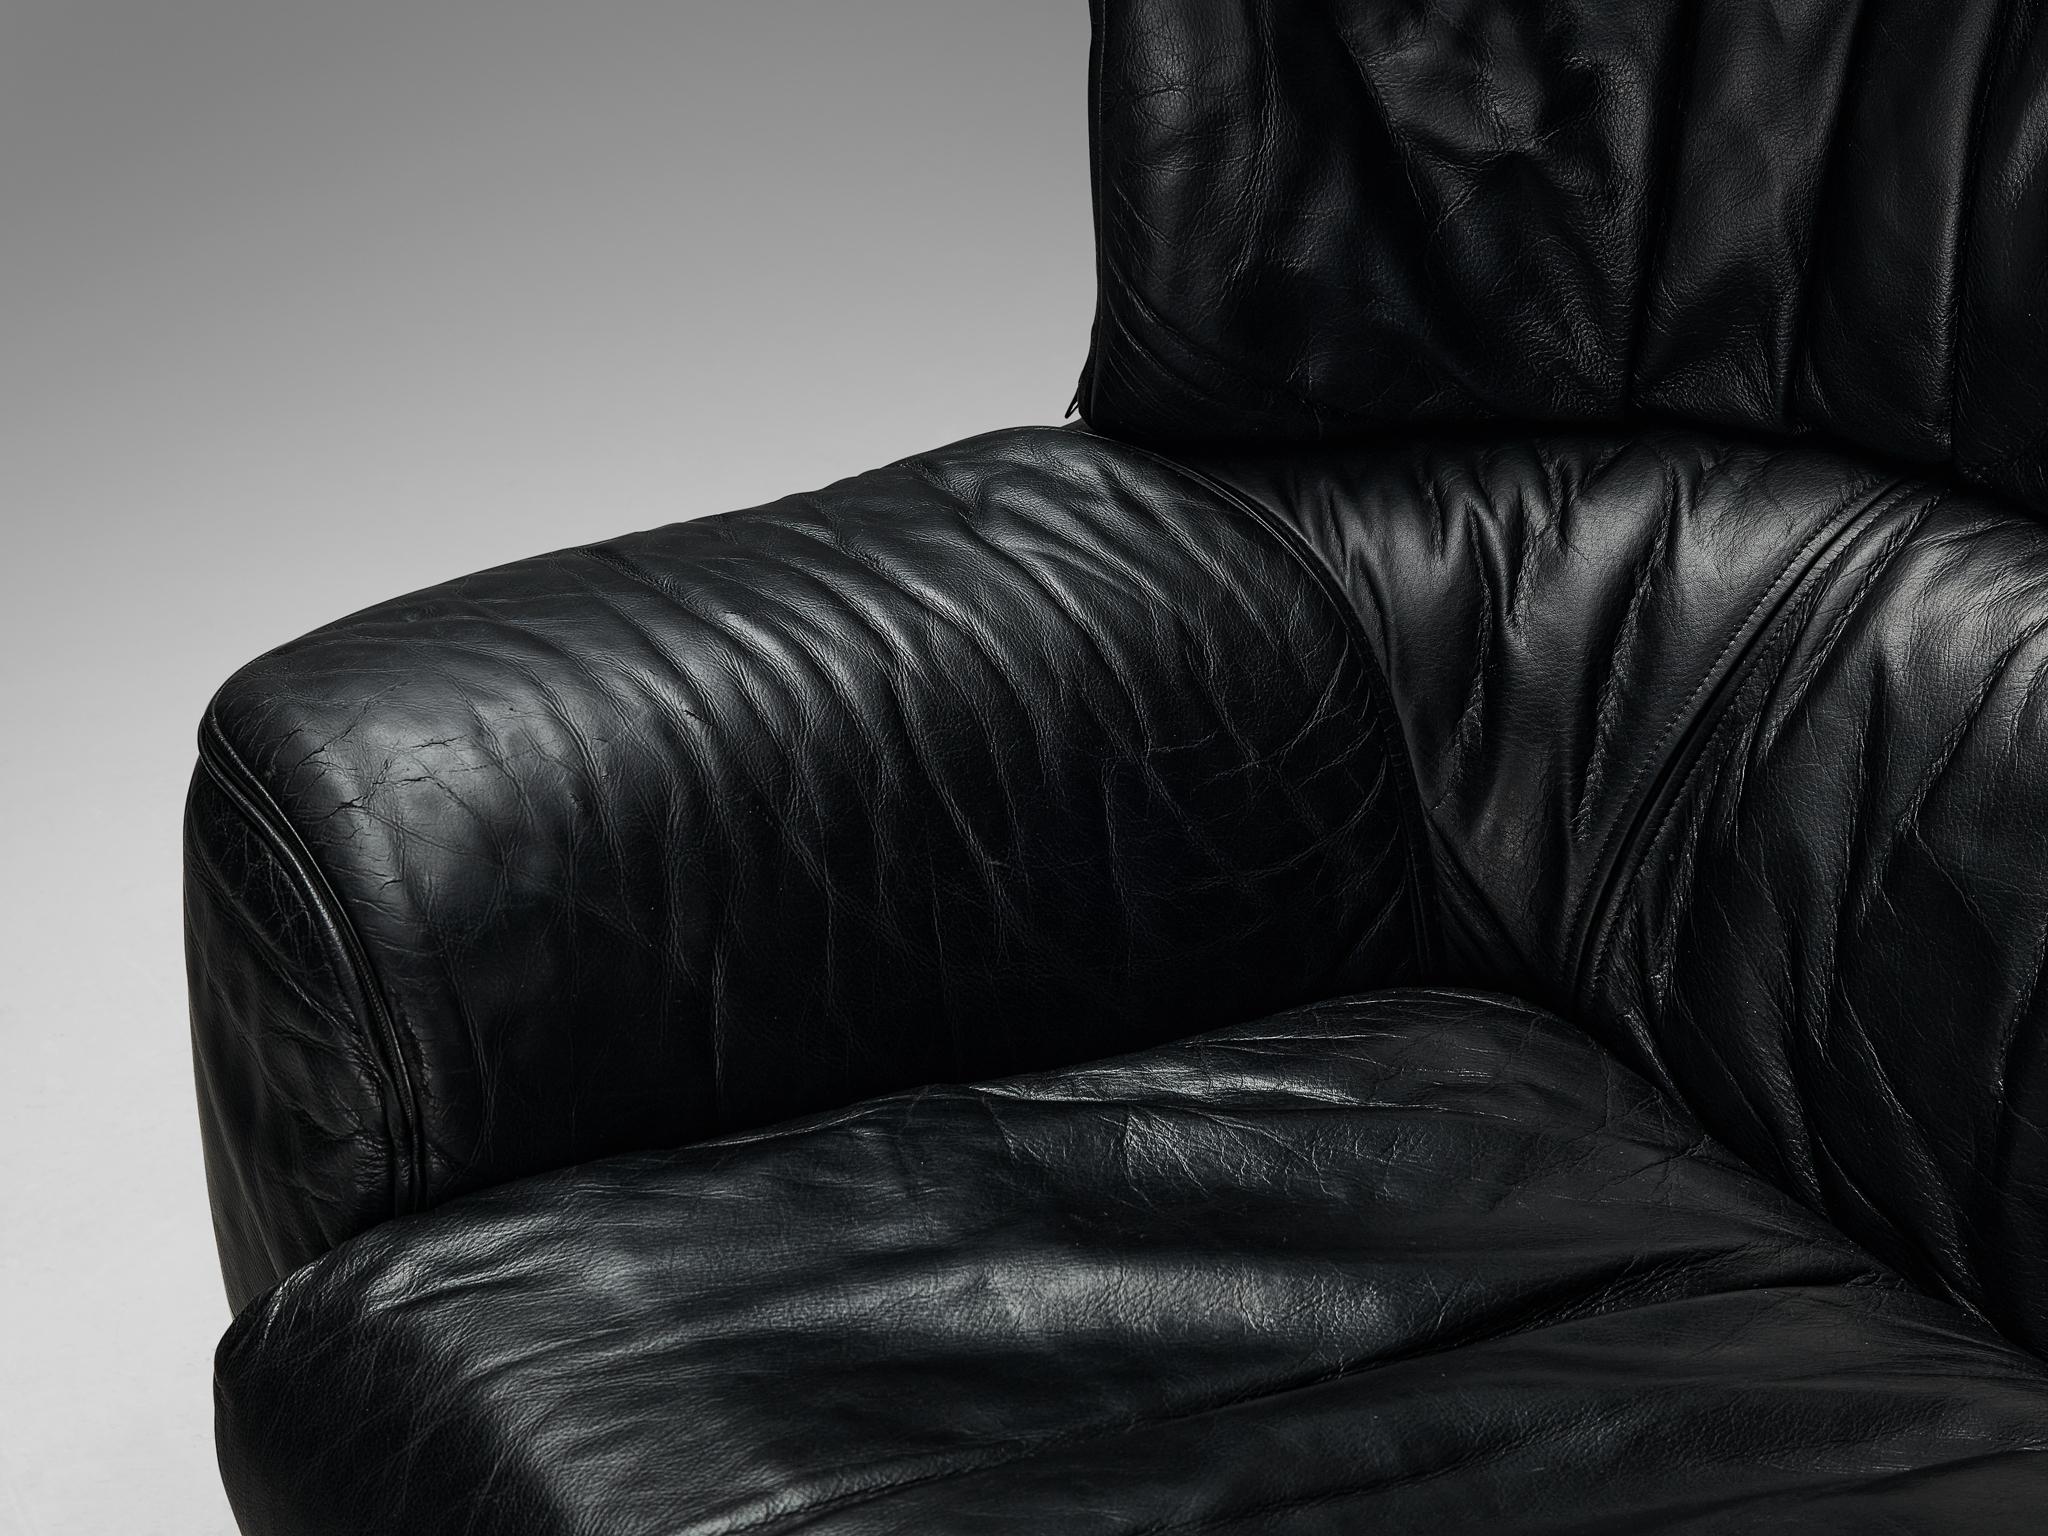 Gianfranco Frattini for Cassina 'Bull' Lounge Chair in Black Leather